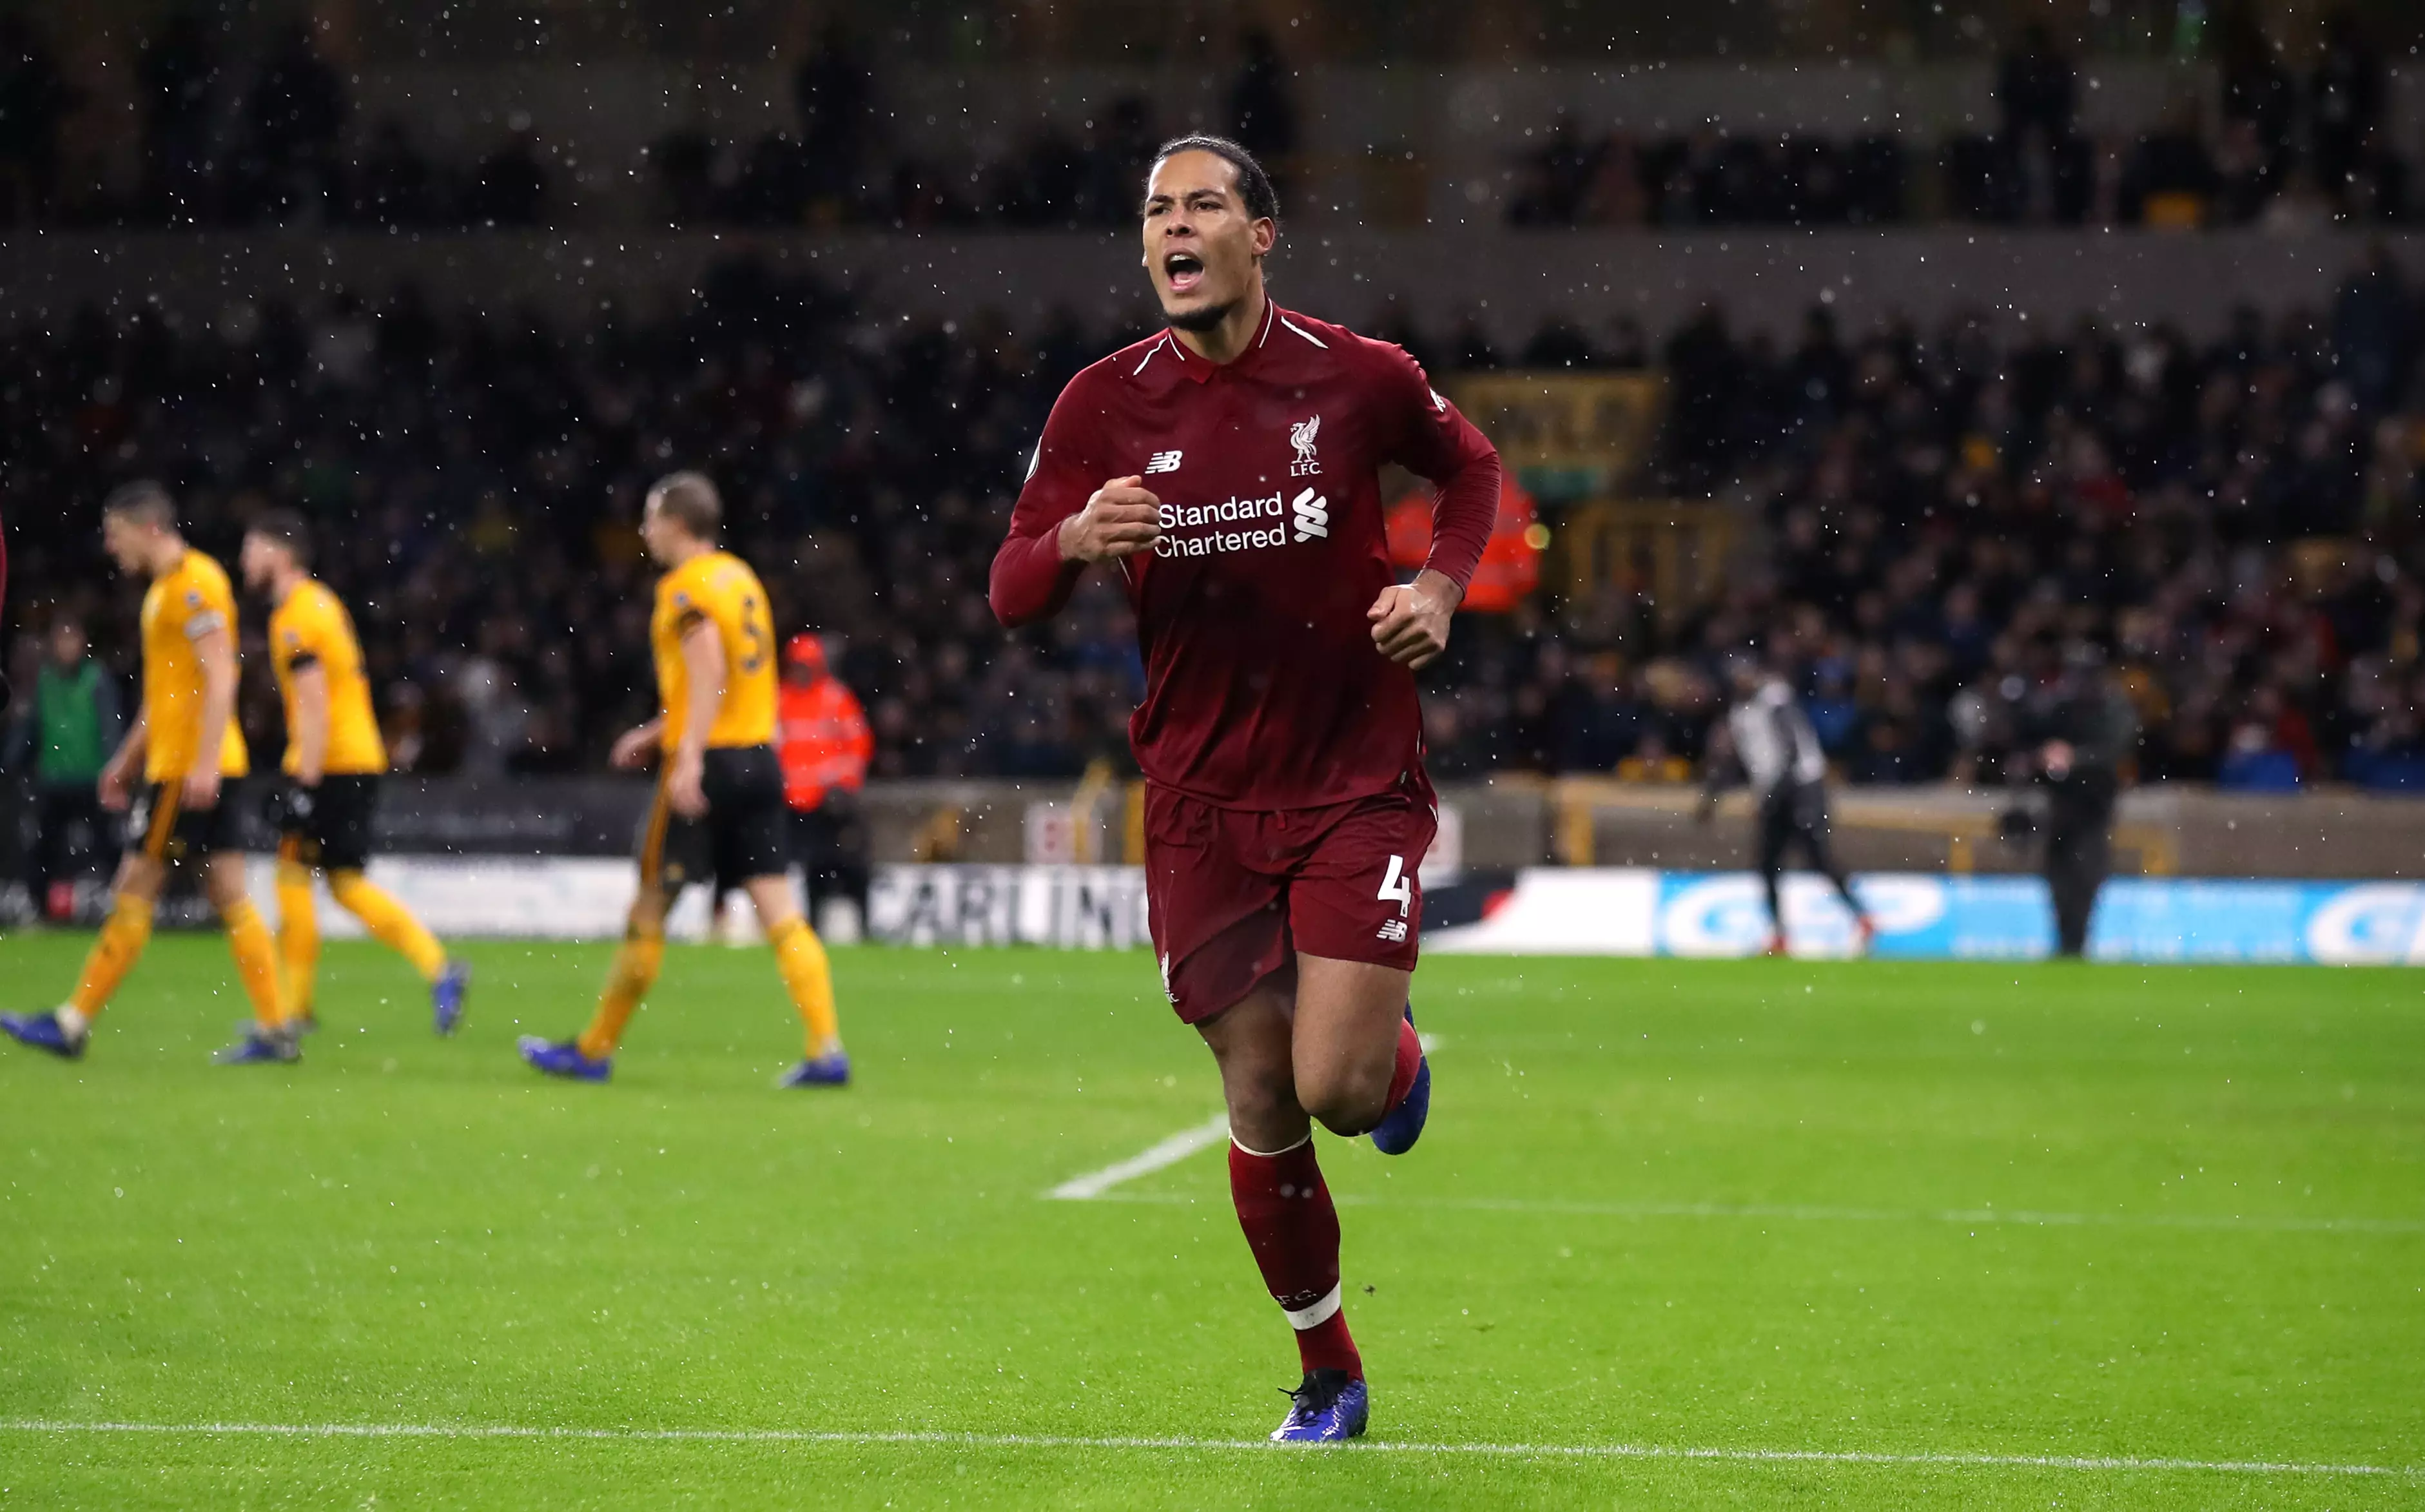 Van Dijk has been very impressive since moving from Southampton. Image: PA Images